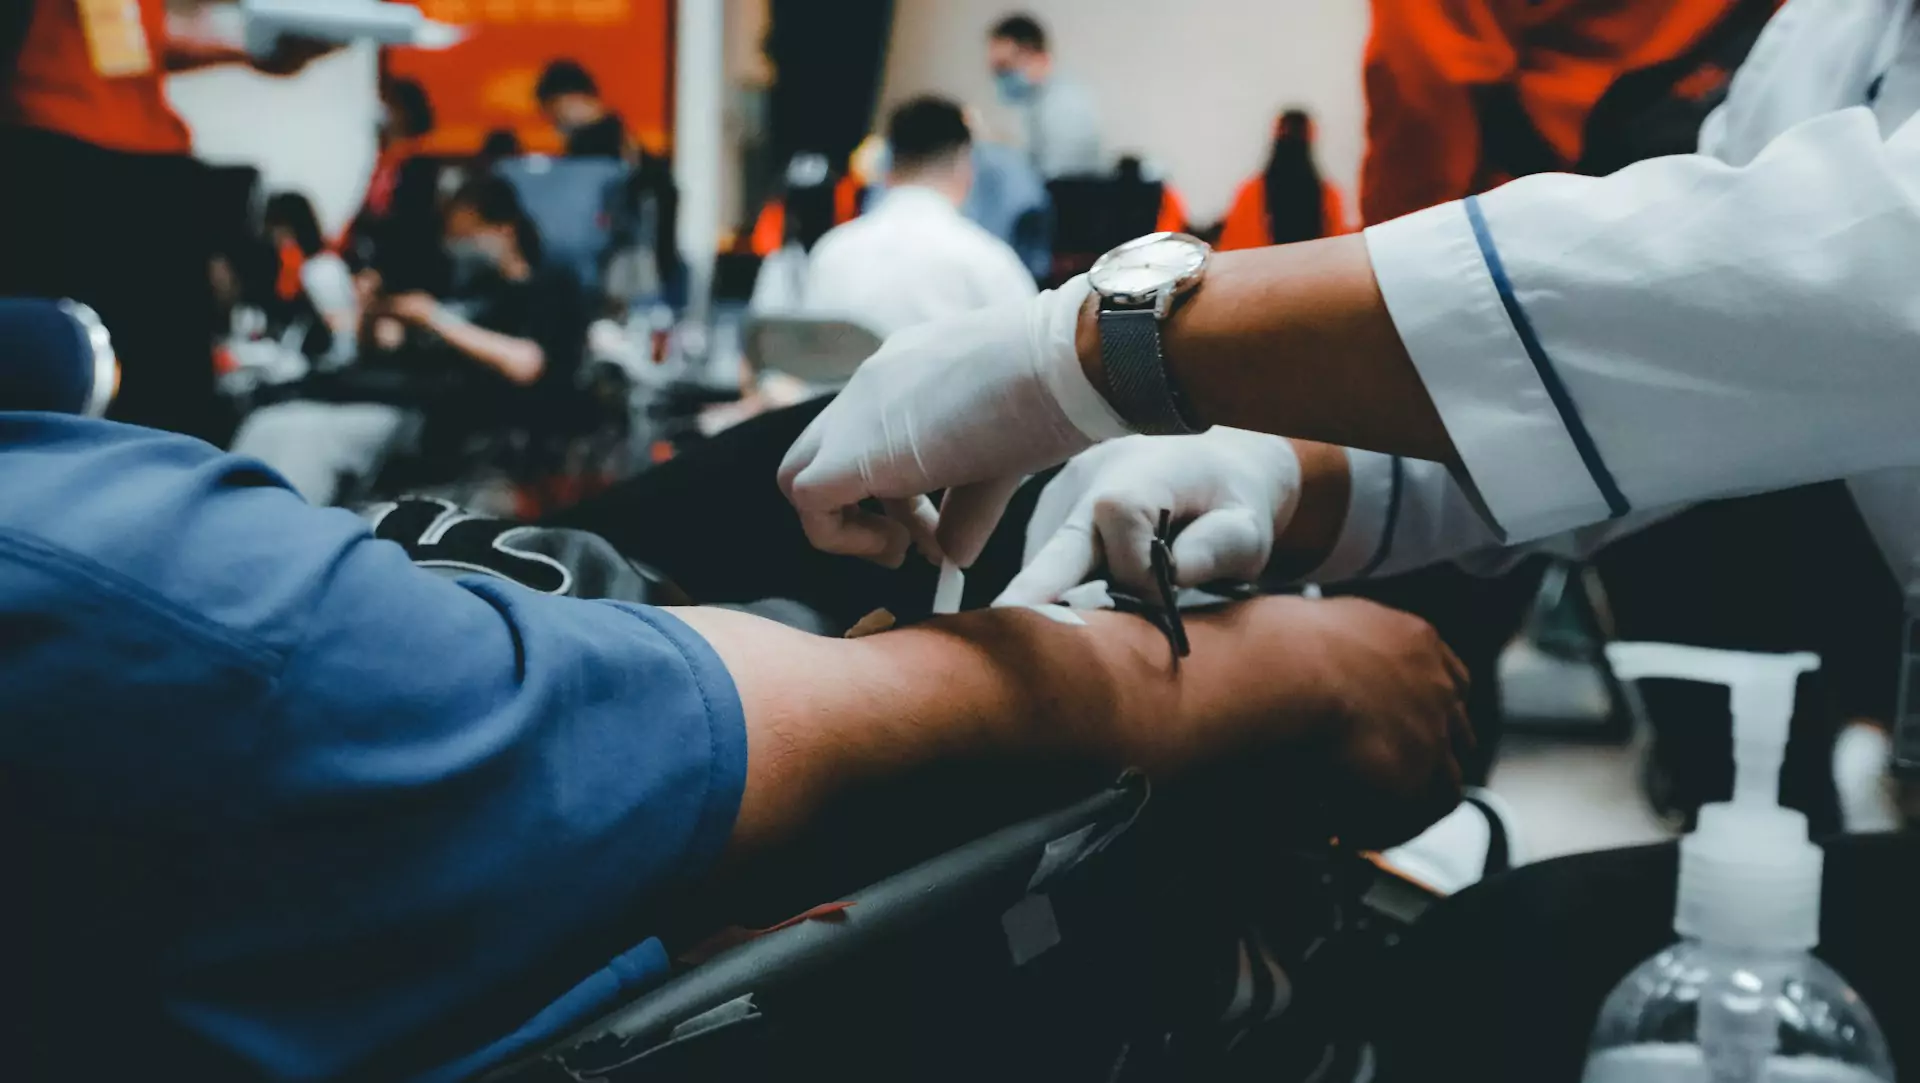 A person getting their blood drawn by a doctor for medical purposes.